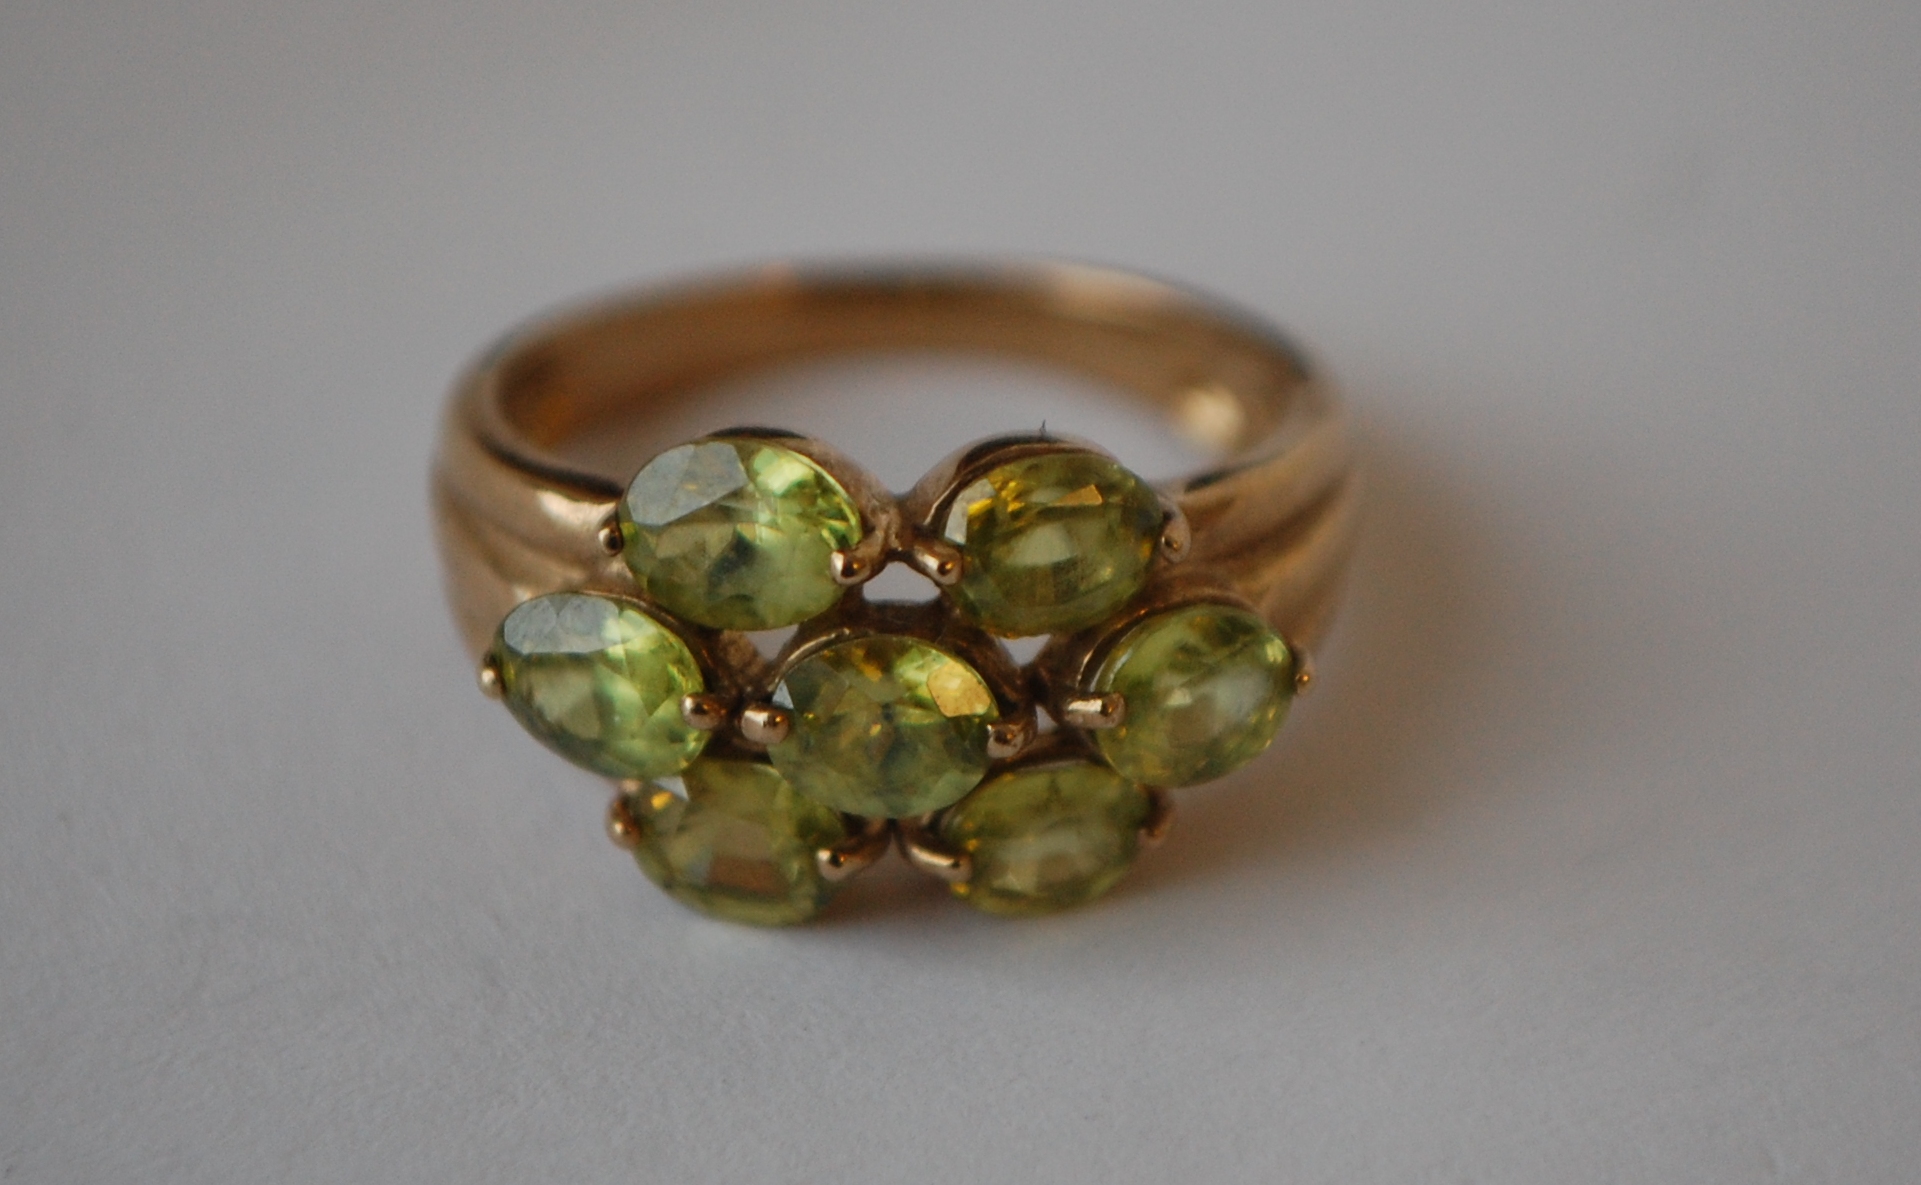 A hallmarked 9ct gold cluster ring set with peridot. Hallmarked Birmingham. Size N. Weight 3.3g - Image 2 of 3